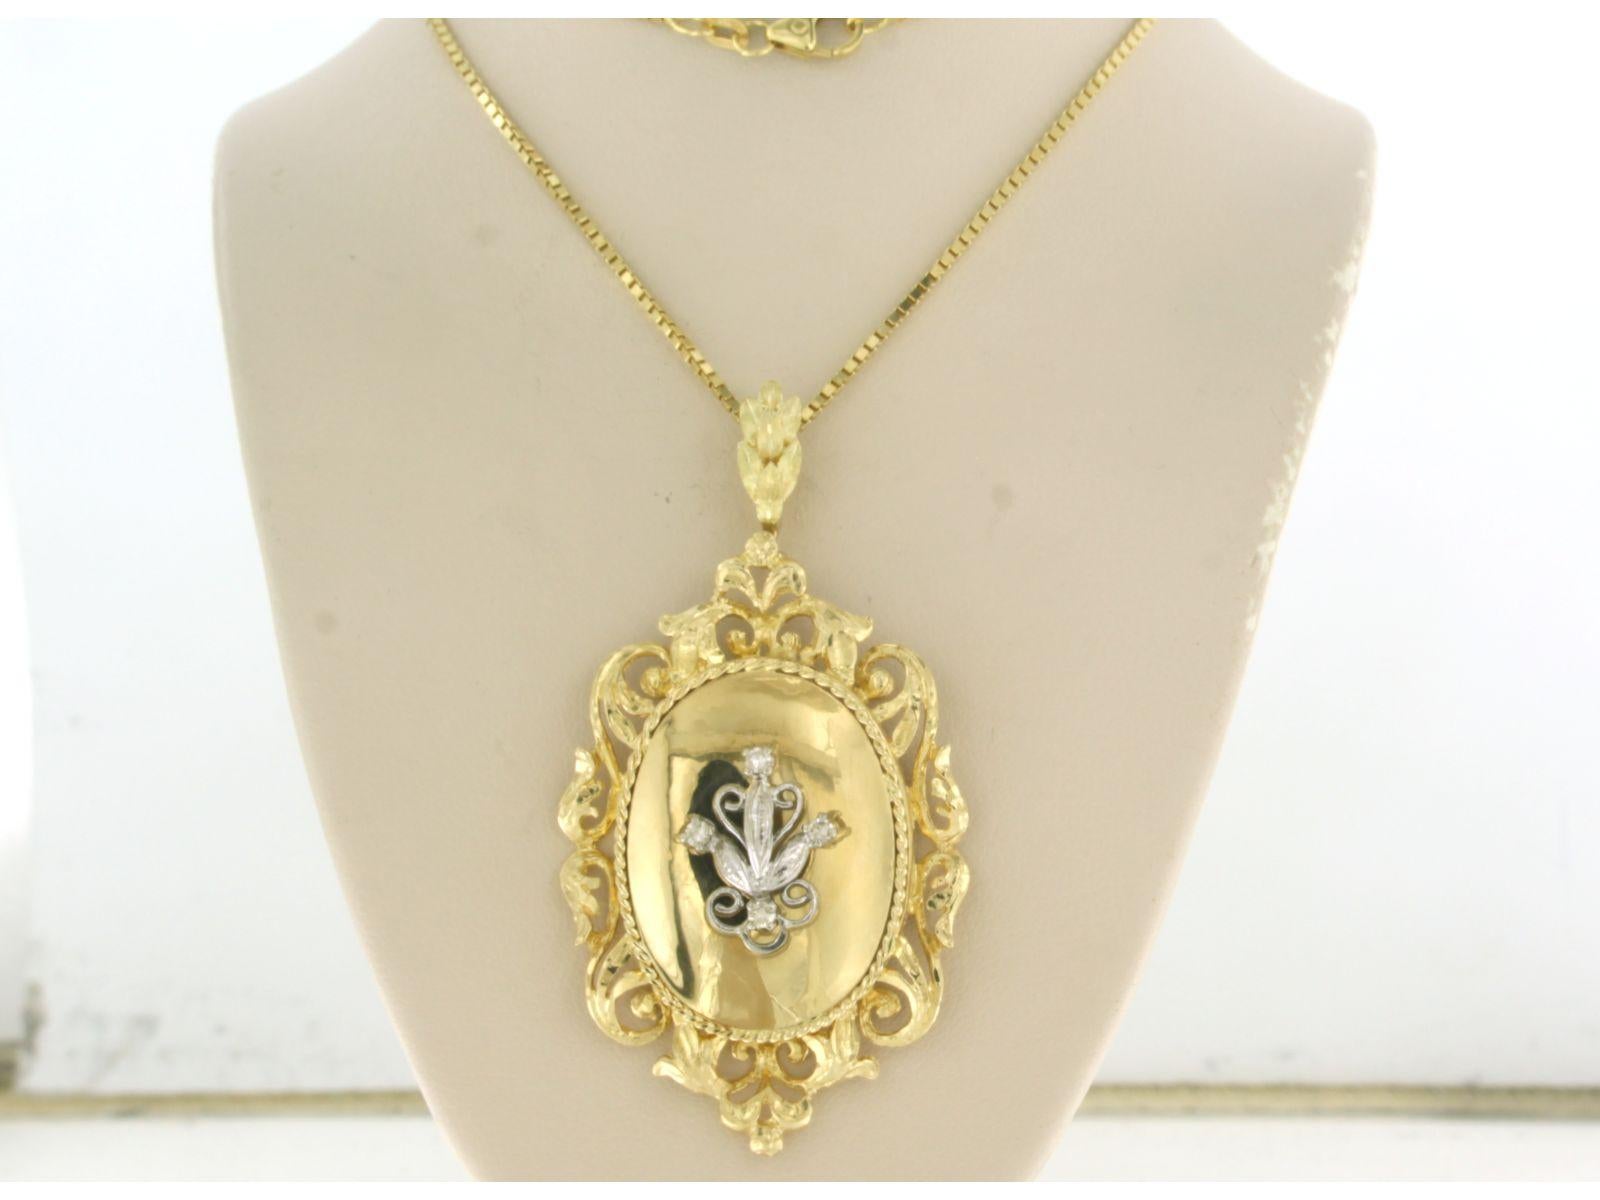 14k yellow gold necklace with bicolour gold pendant set with single cut diamonds up to . 0.06ct - F/G - VS/SI - 45 cm long

the size of the pendant is 6.0 cm by 3.2 cm wide

total weight 15.6 grams

set with

- 3 x 1.7 mm single cut diamond,